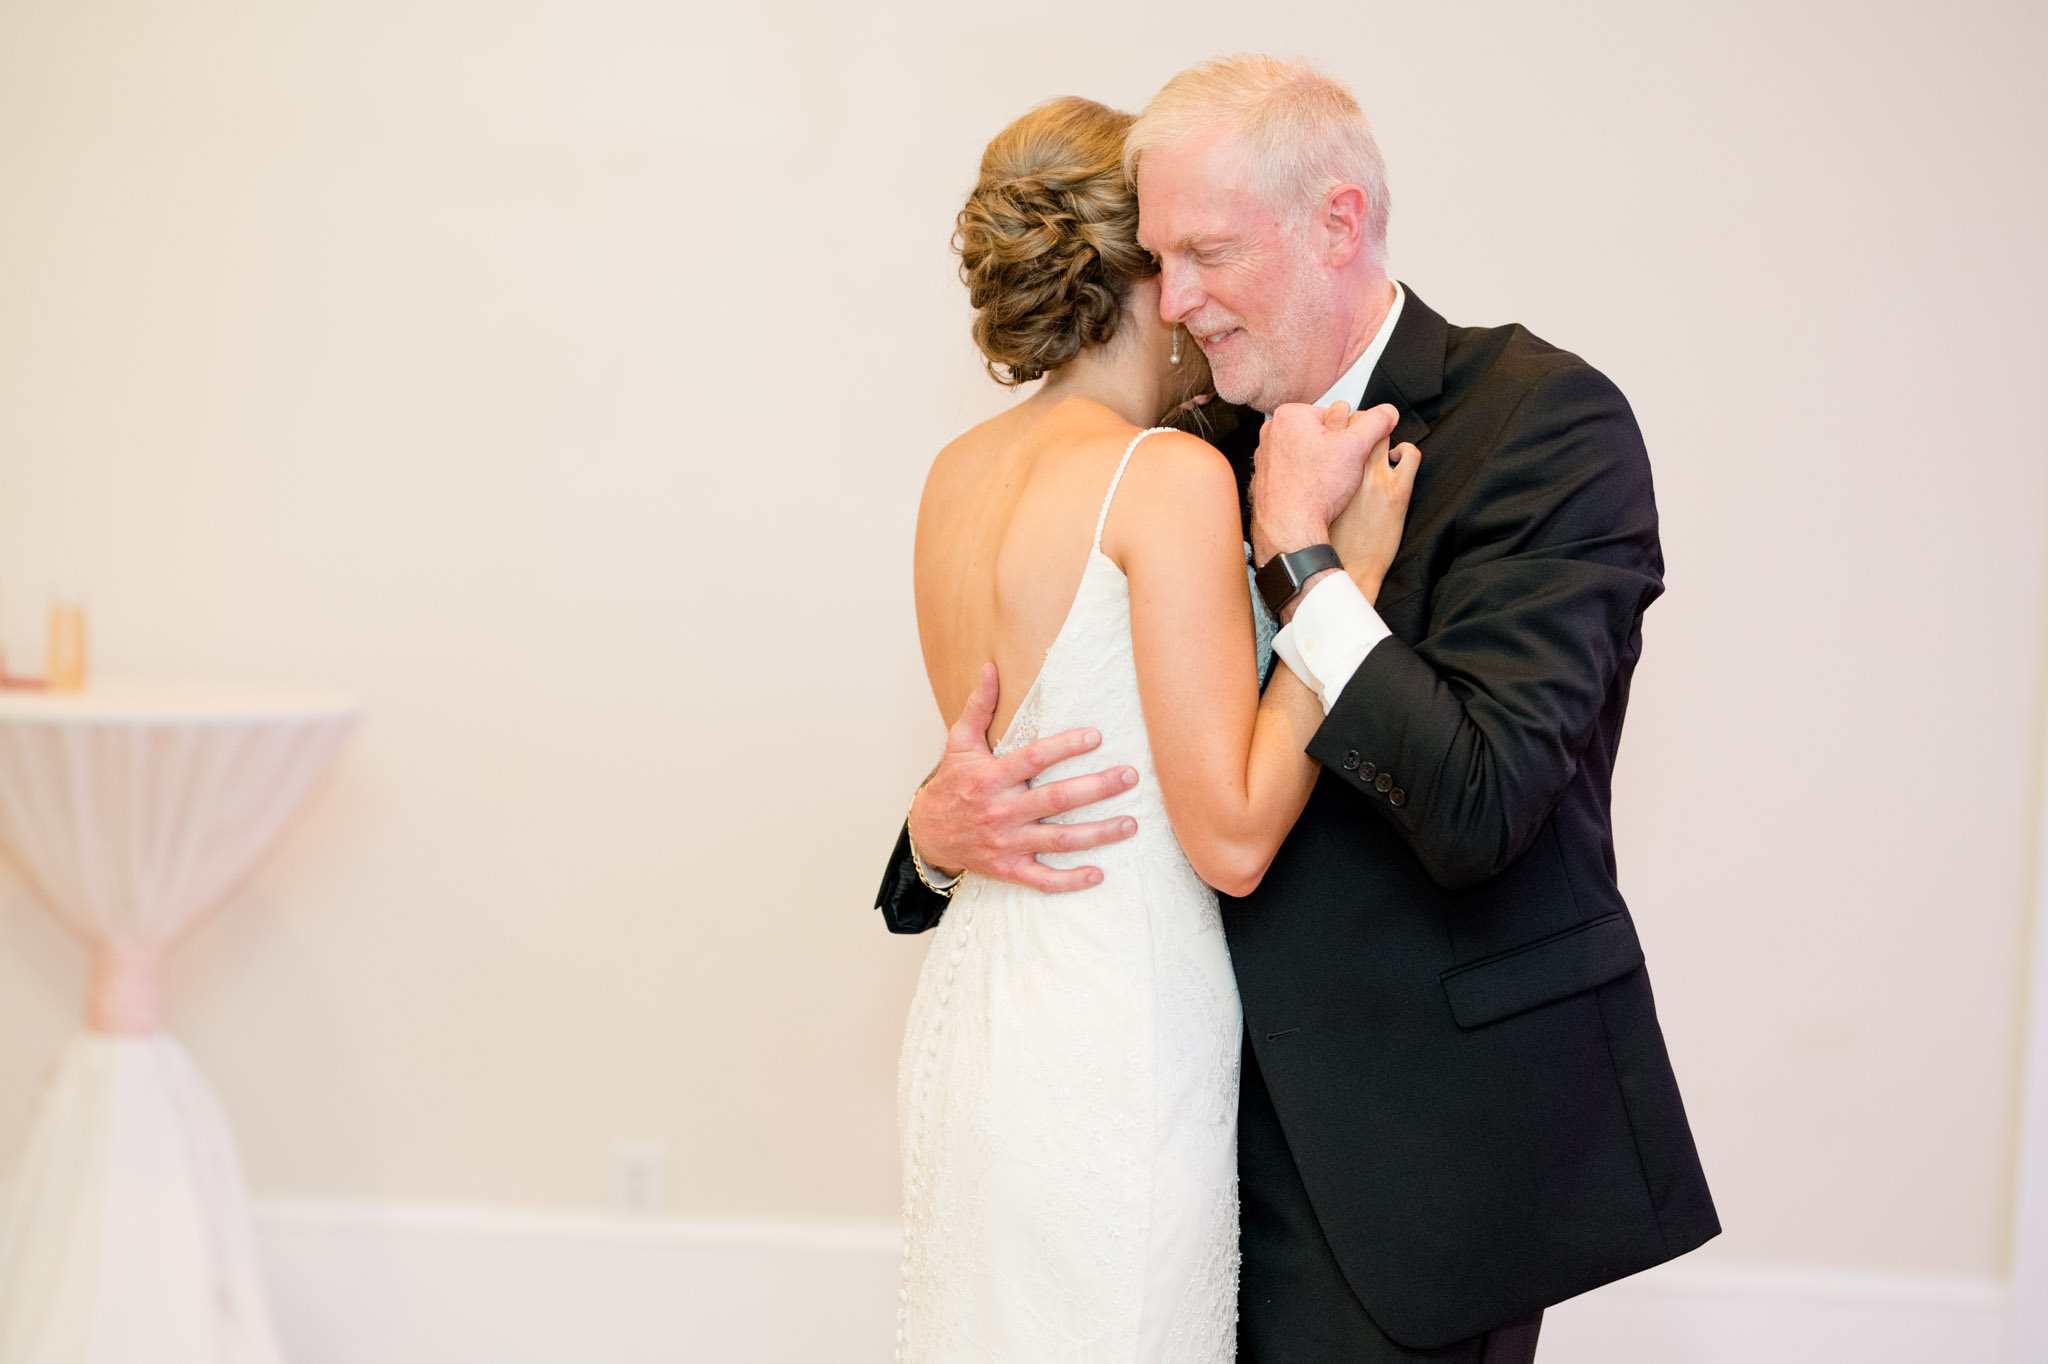 Bride's father holds her close during dance.